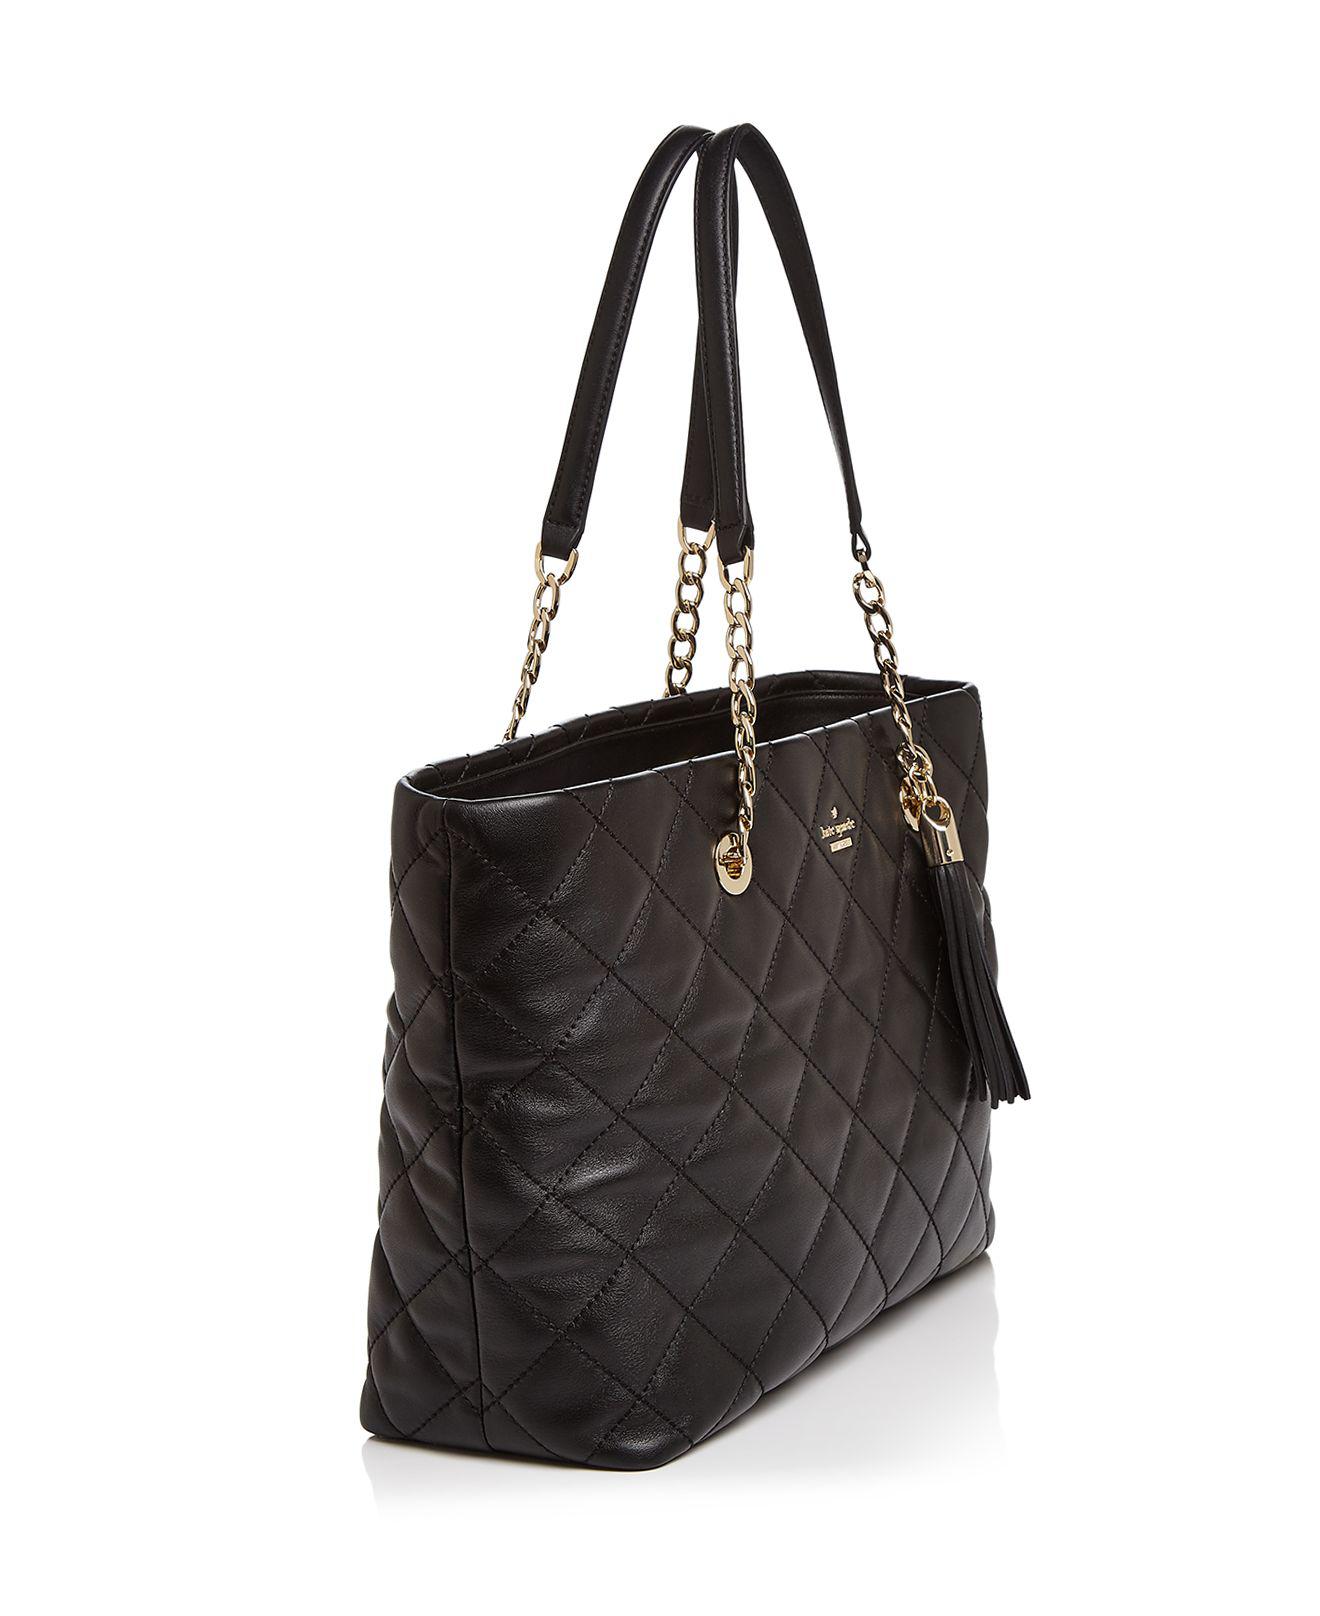 Kate Spade Emerson Place Priya Quilted Leather Tote in Black/Gold ...